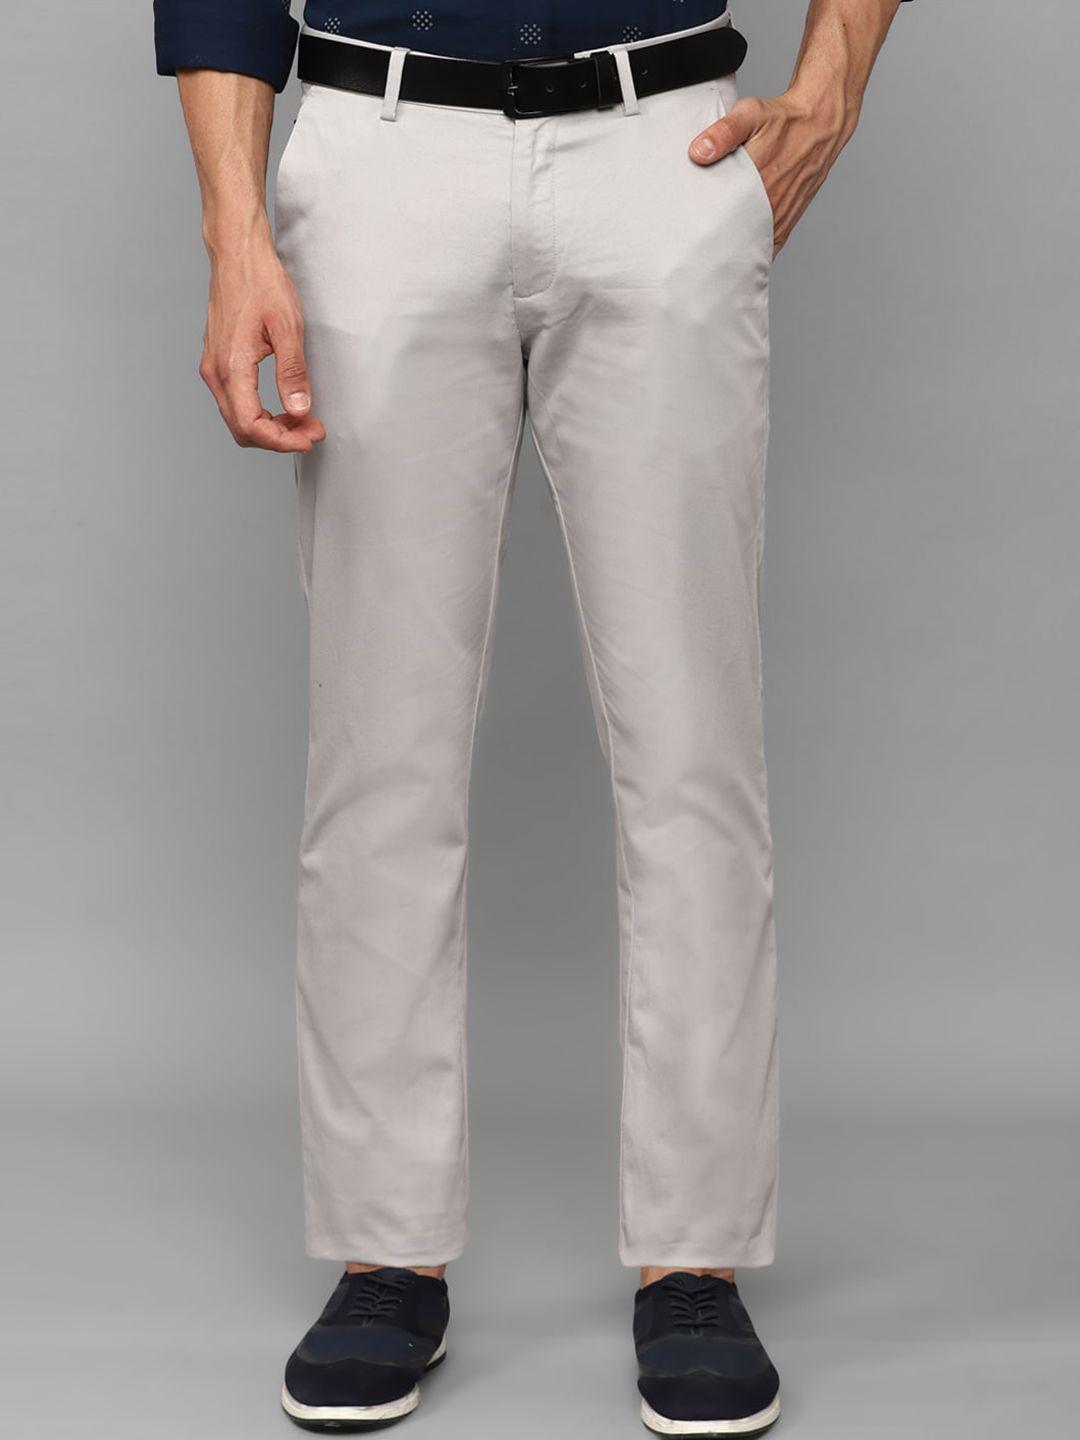 allen solly men mid-rise chinos trousers